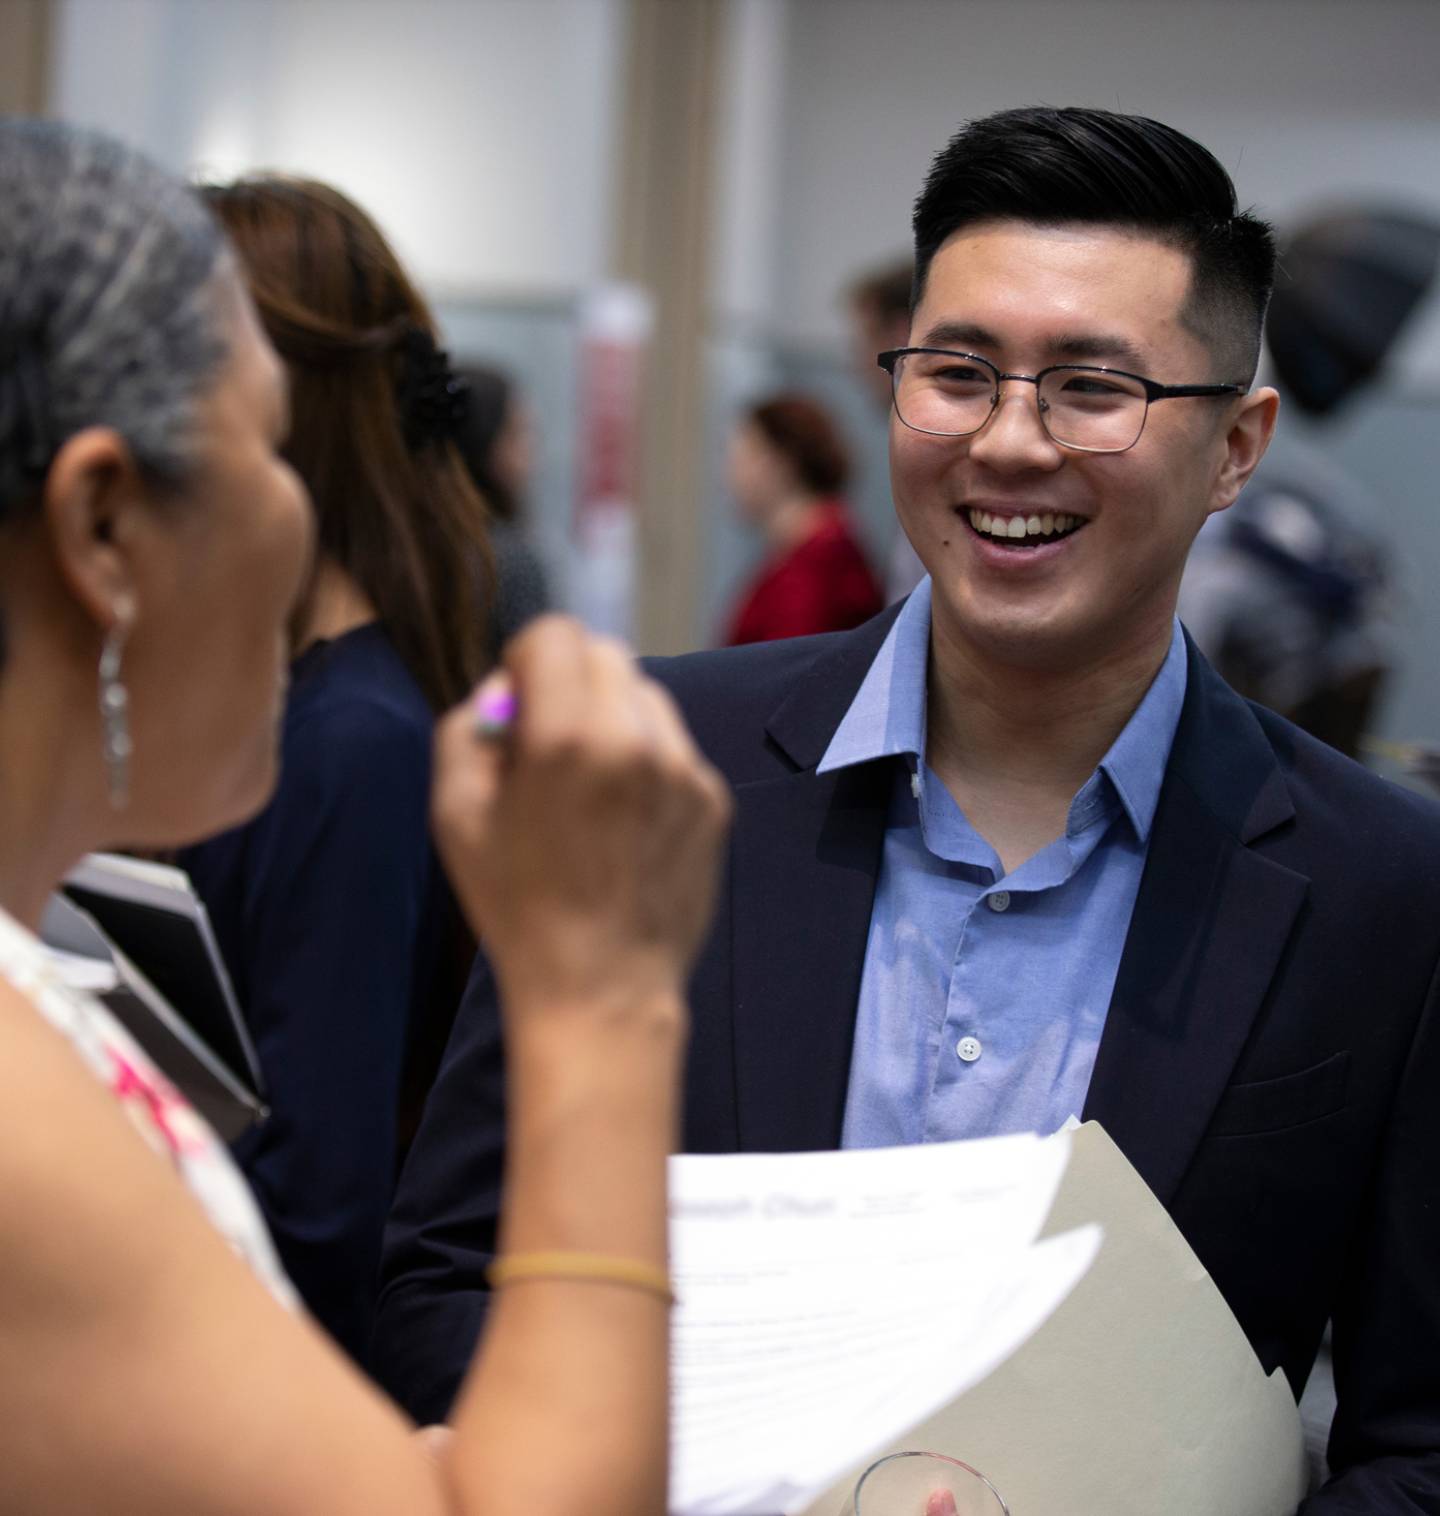 A middle-aged Black woman talks excitedly to a young Asian man in professional clothes holding his resume